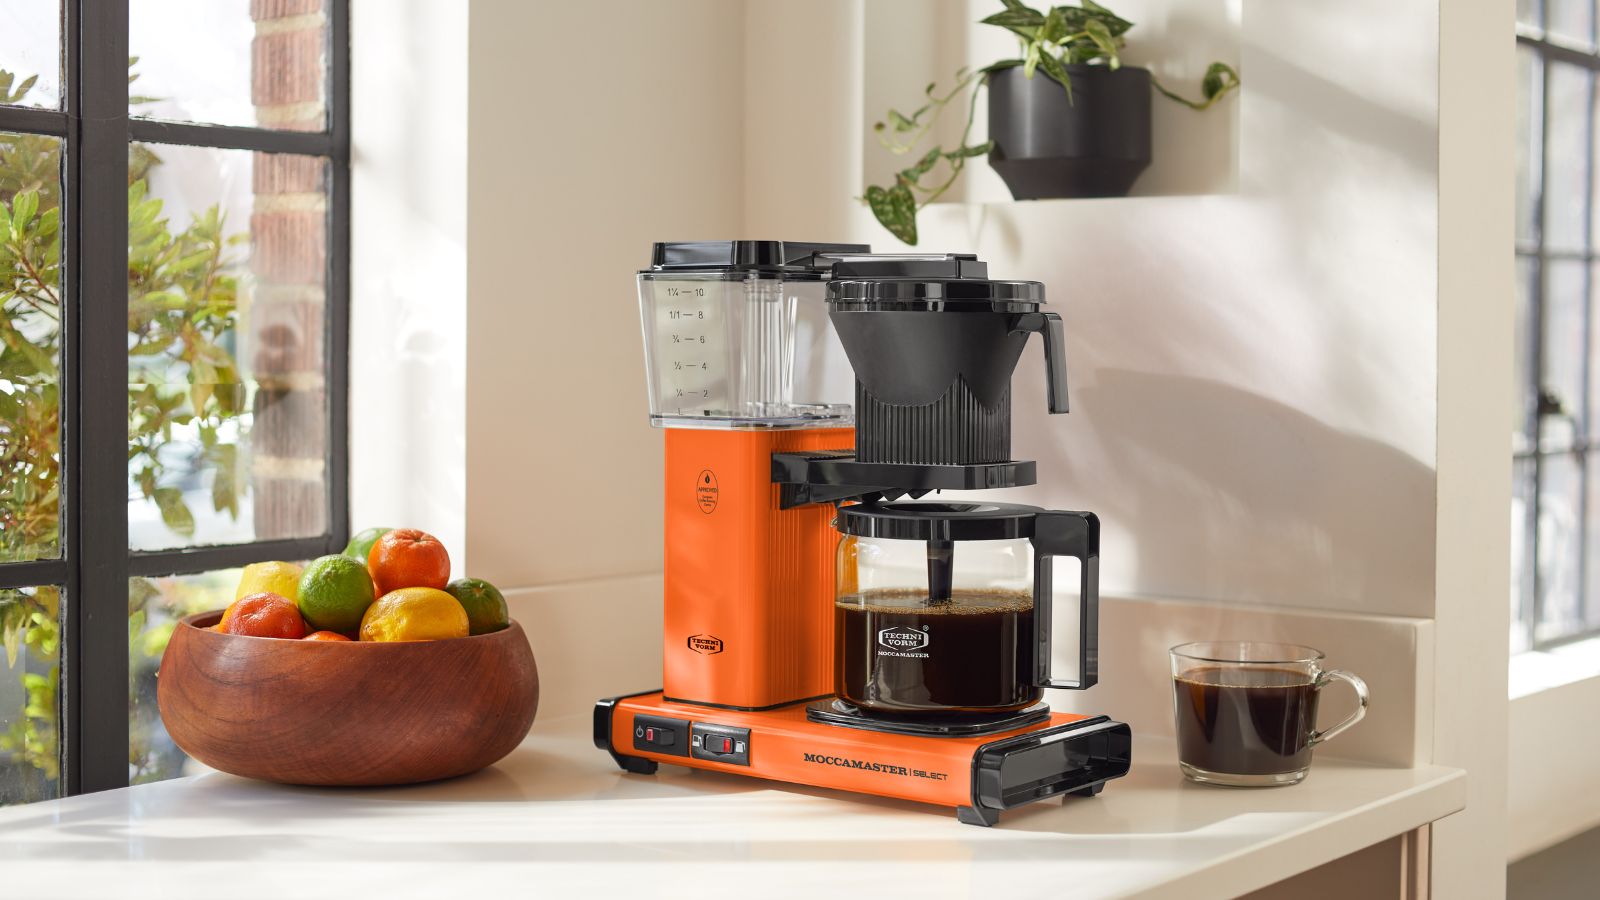 Sur La Table Kitchen Essentials 6-in-1 Espresso Maker - Brew Lattes, Cappuccinos and Single or Double Espressos, Automatic Milk Frother and Digital